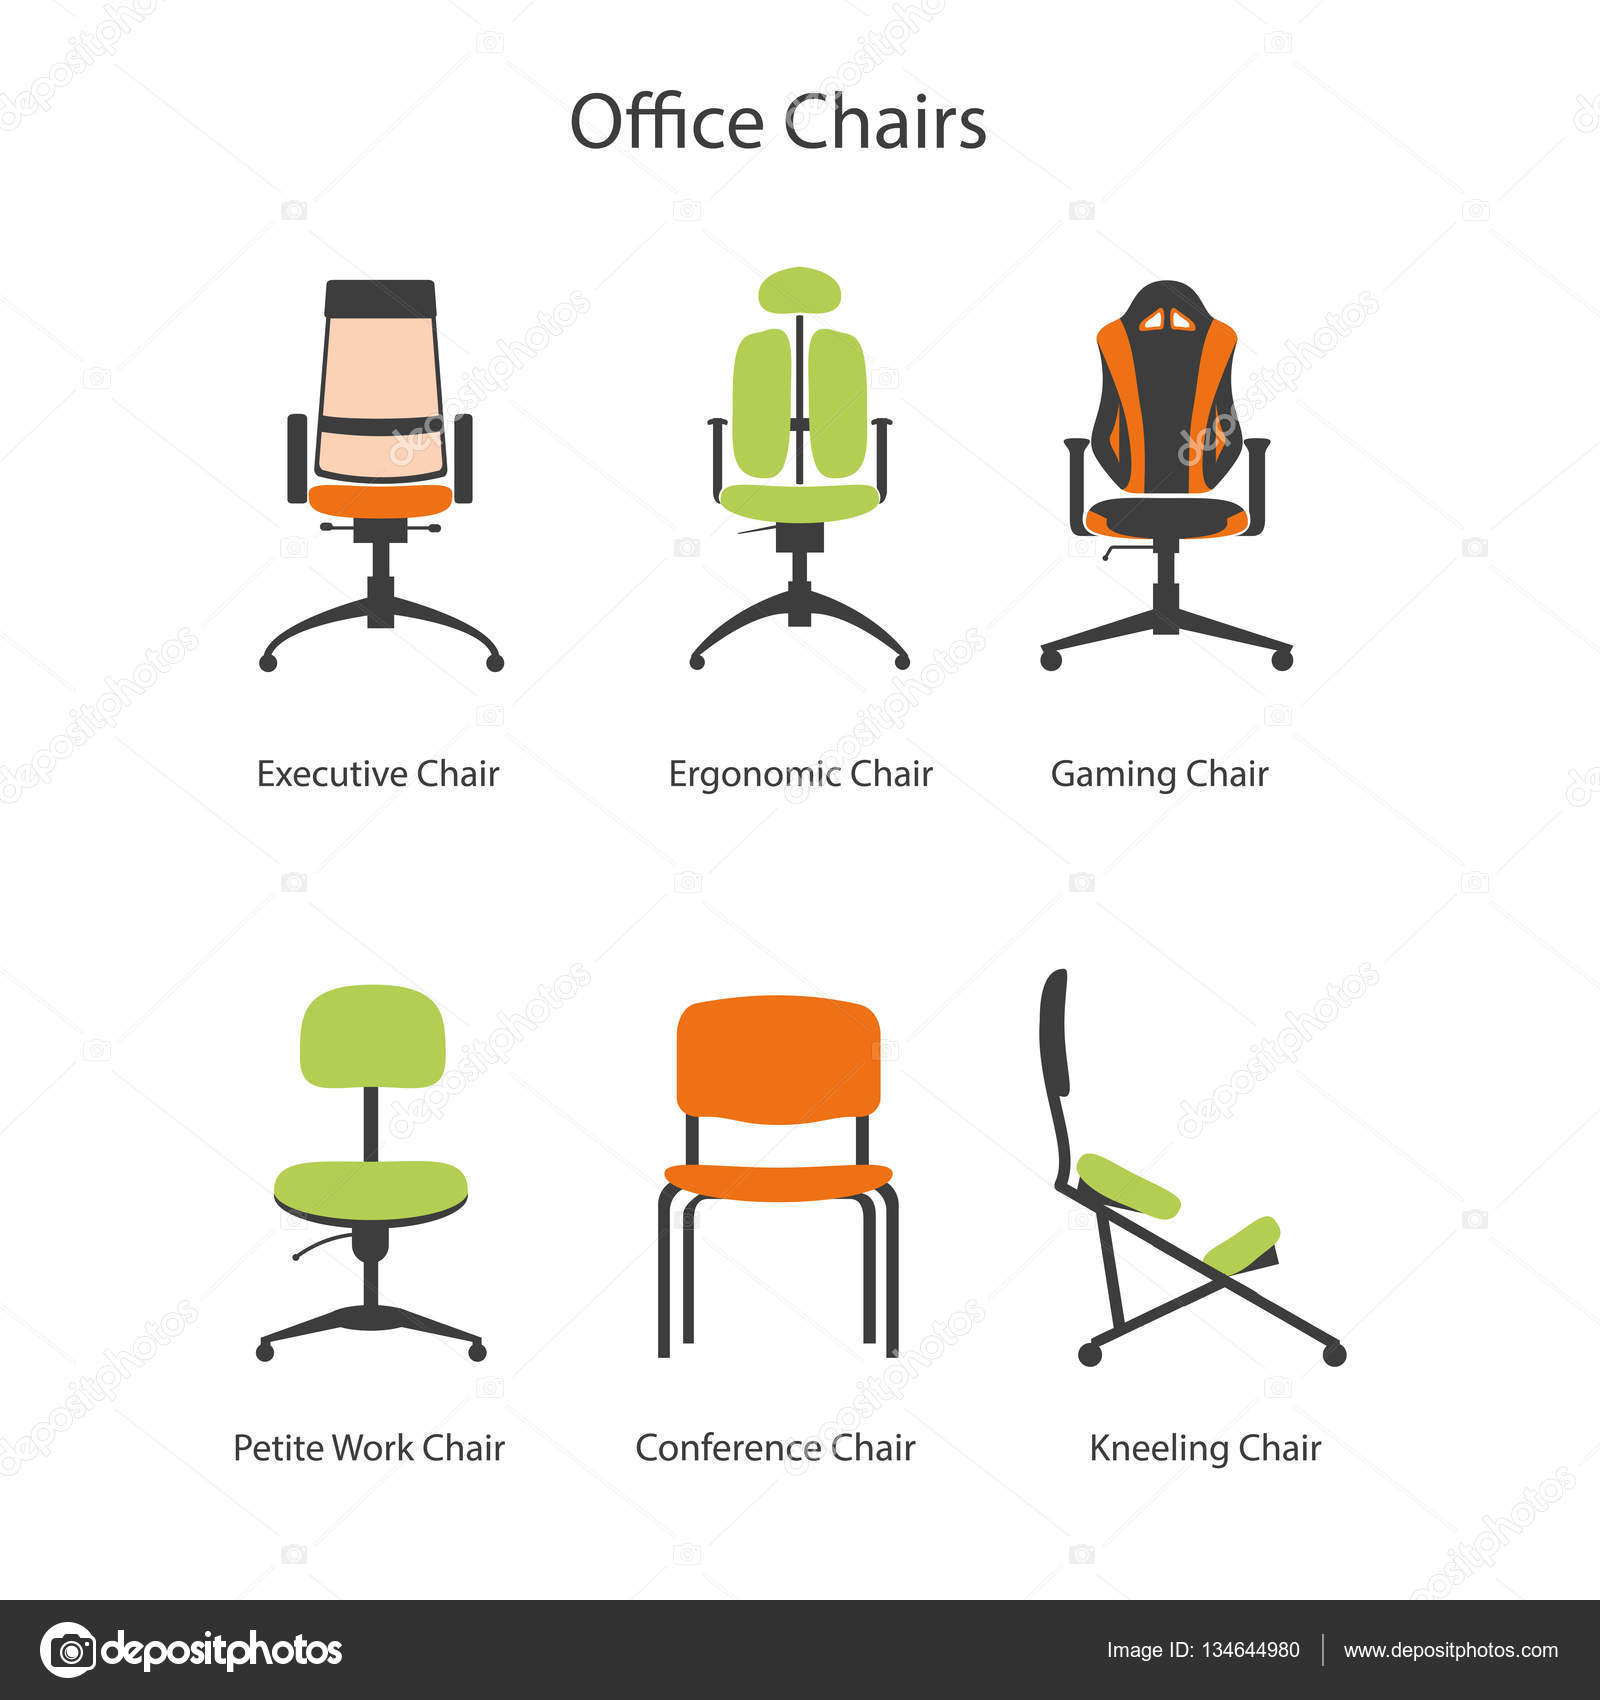 Office Chairs For Working And Studies Vector Image By C Ayake Vector Stock 134644980